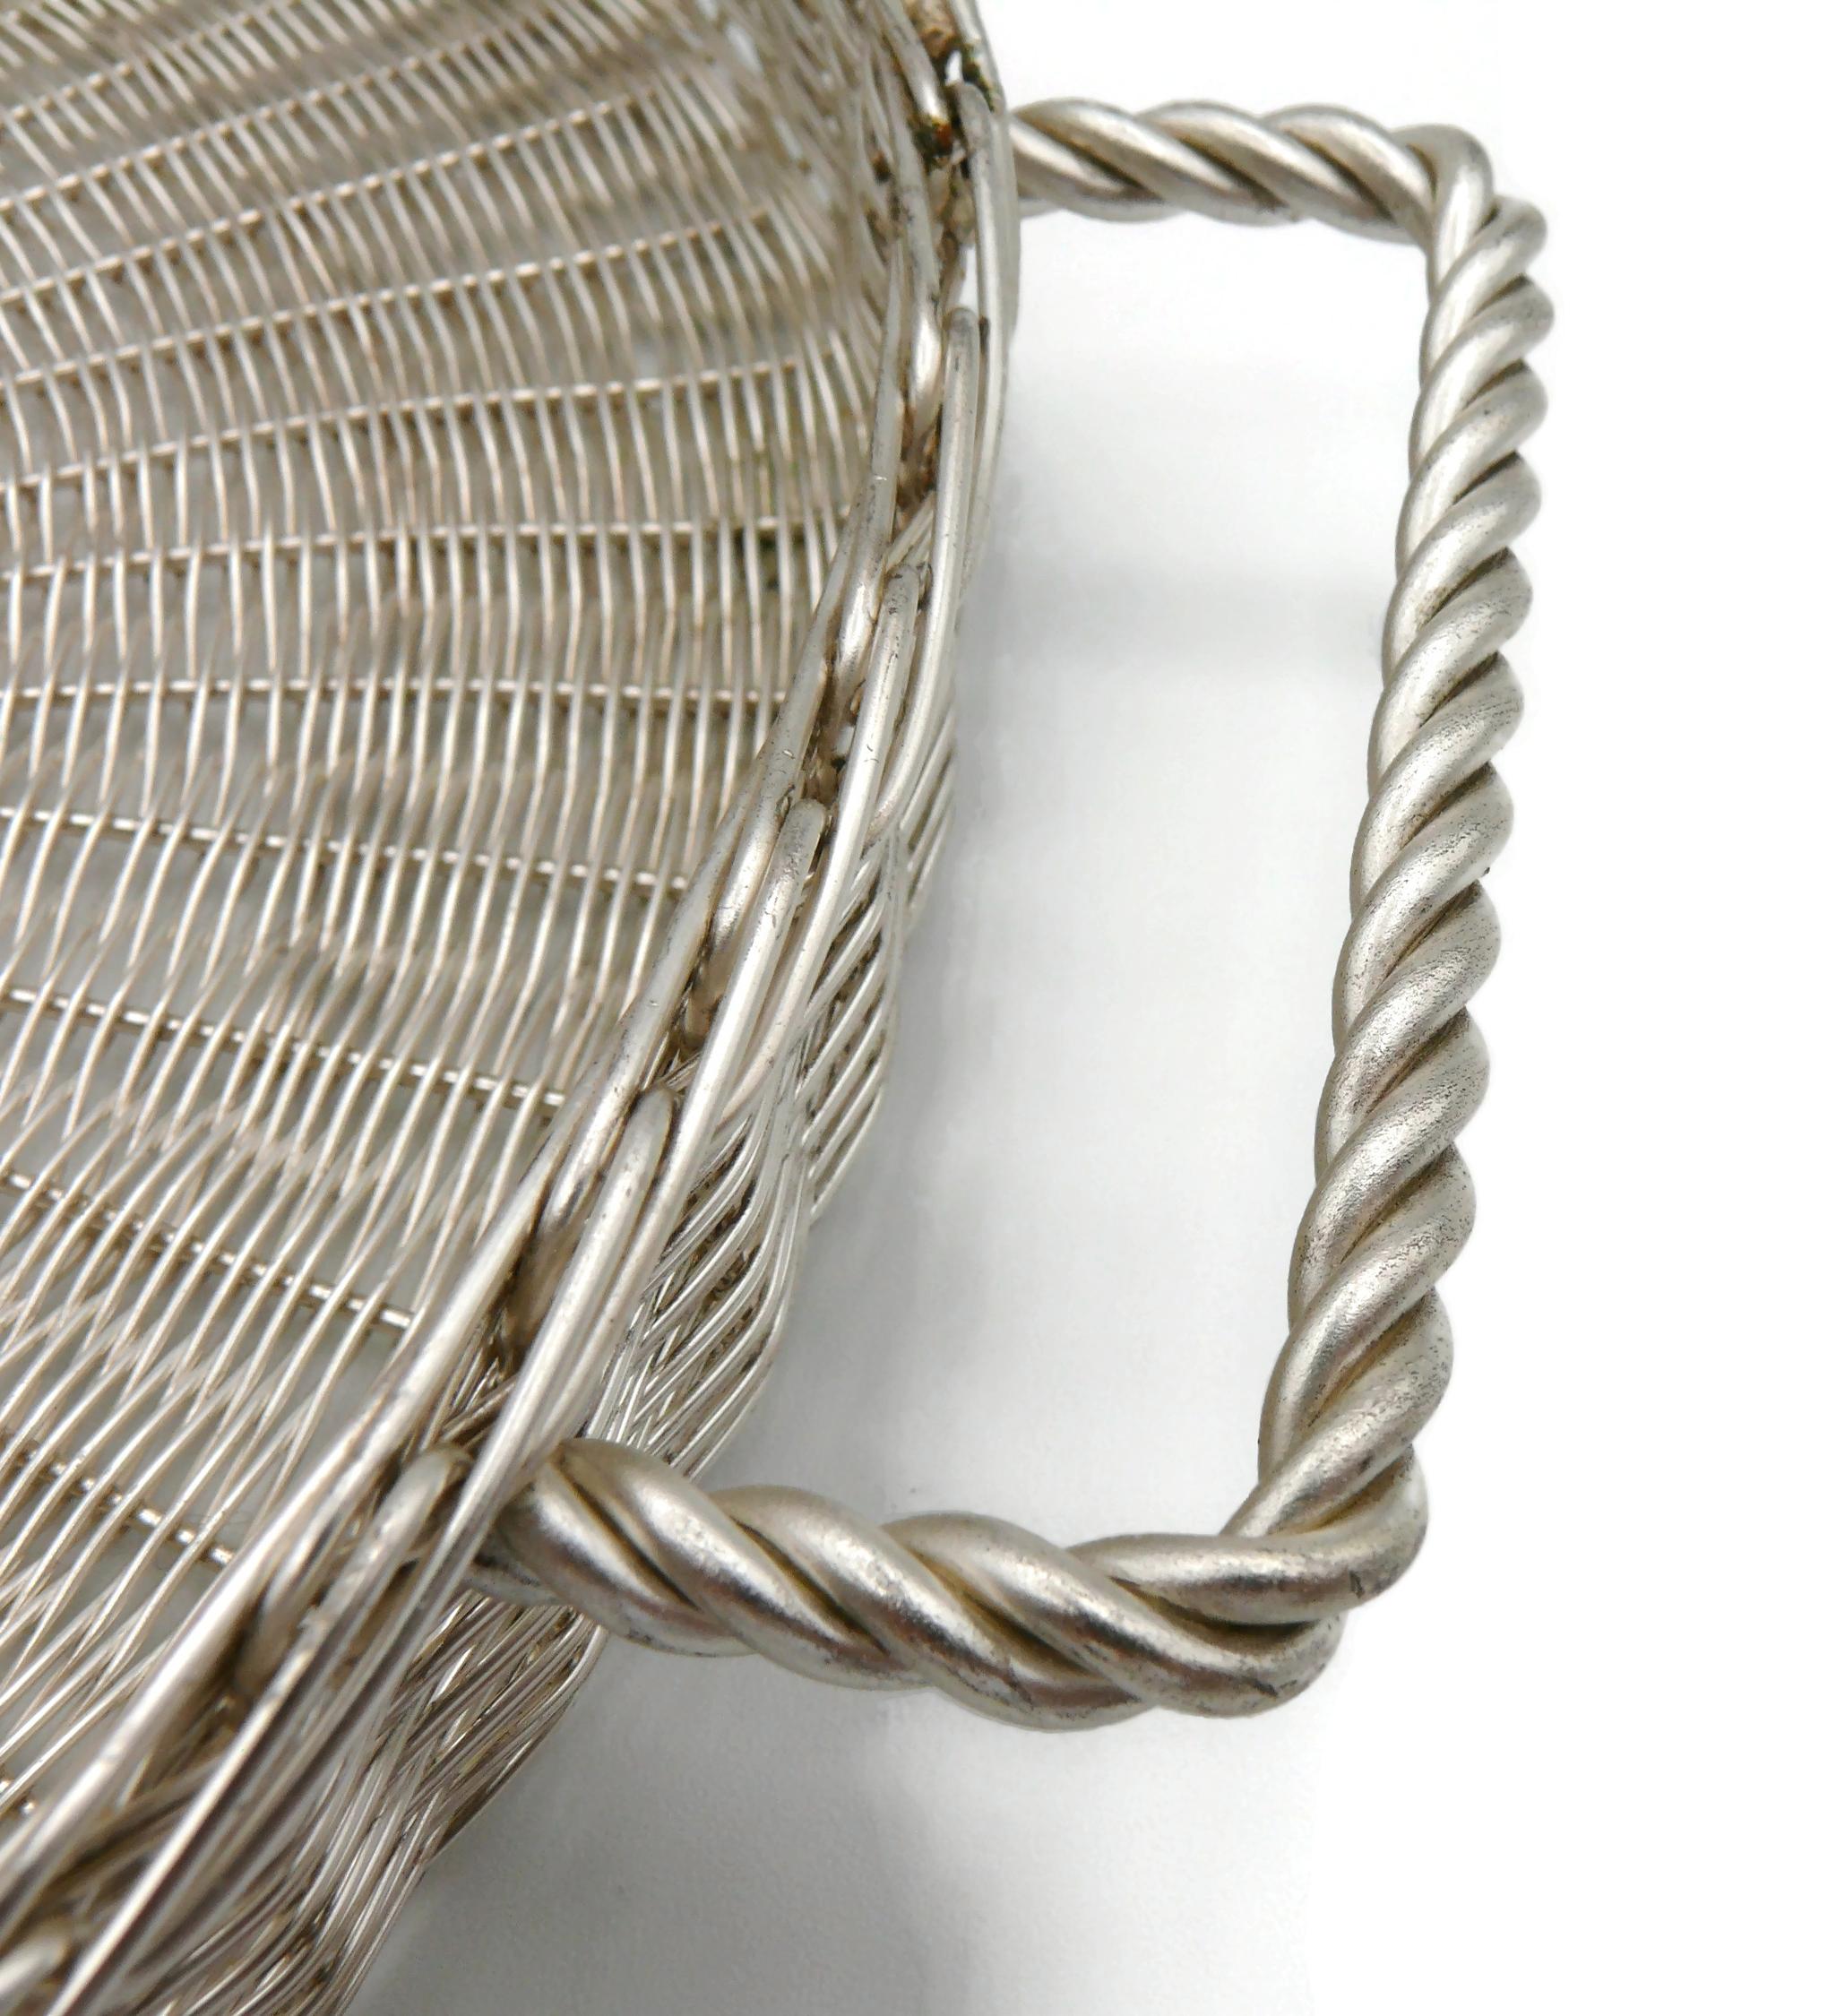 CHRISTIAN DIOR Home Collection Vintage Silver Plated Wicker Style Basket 10